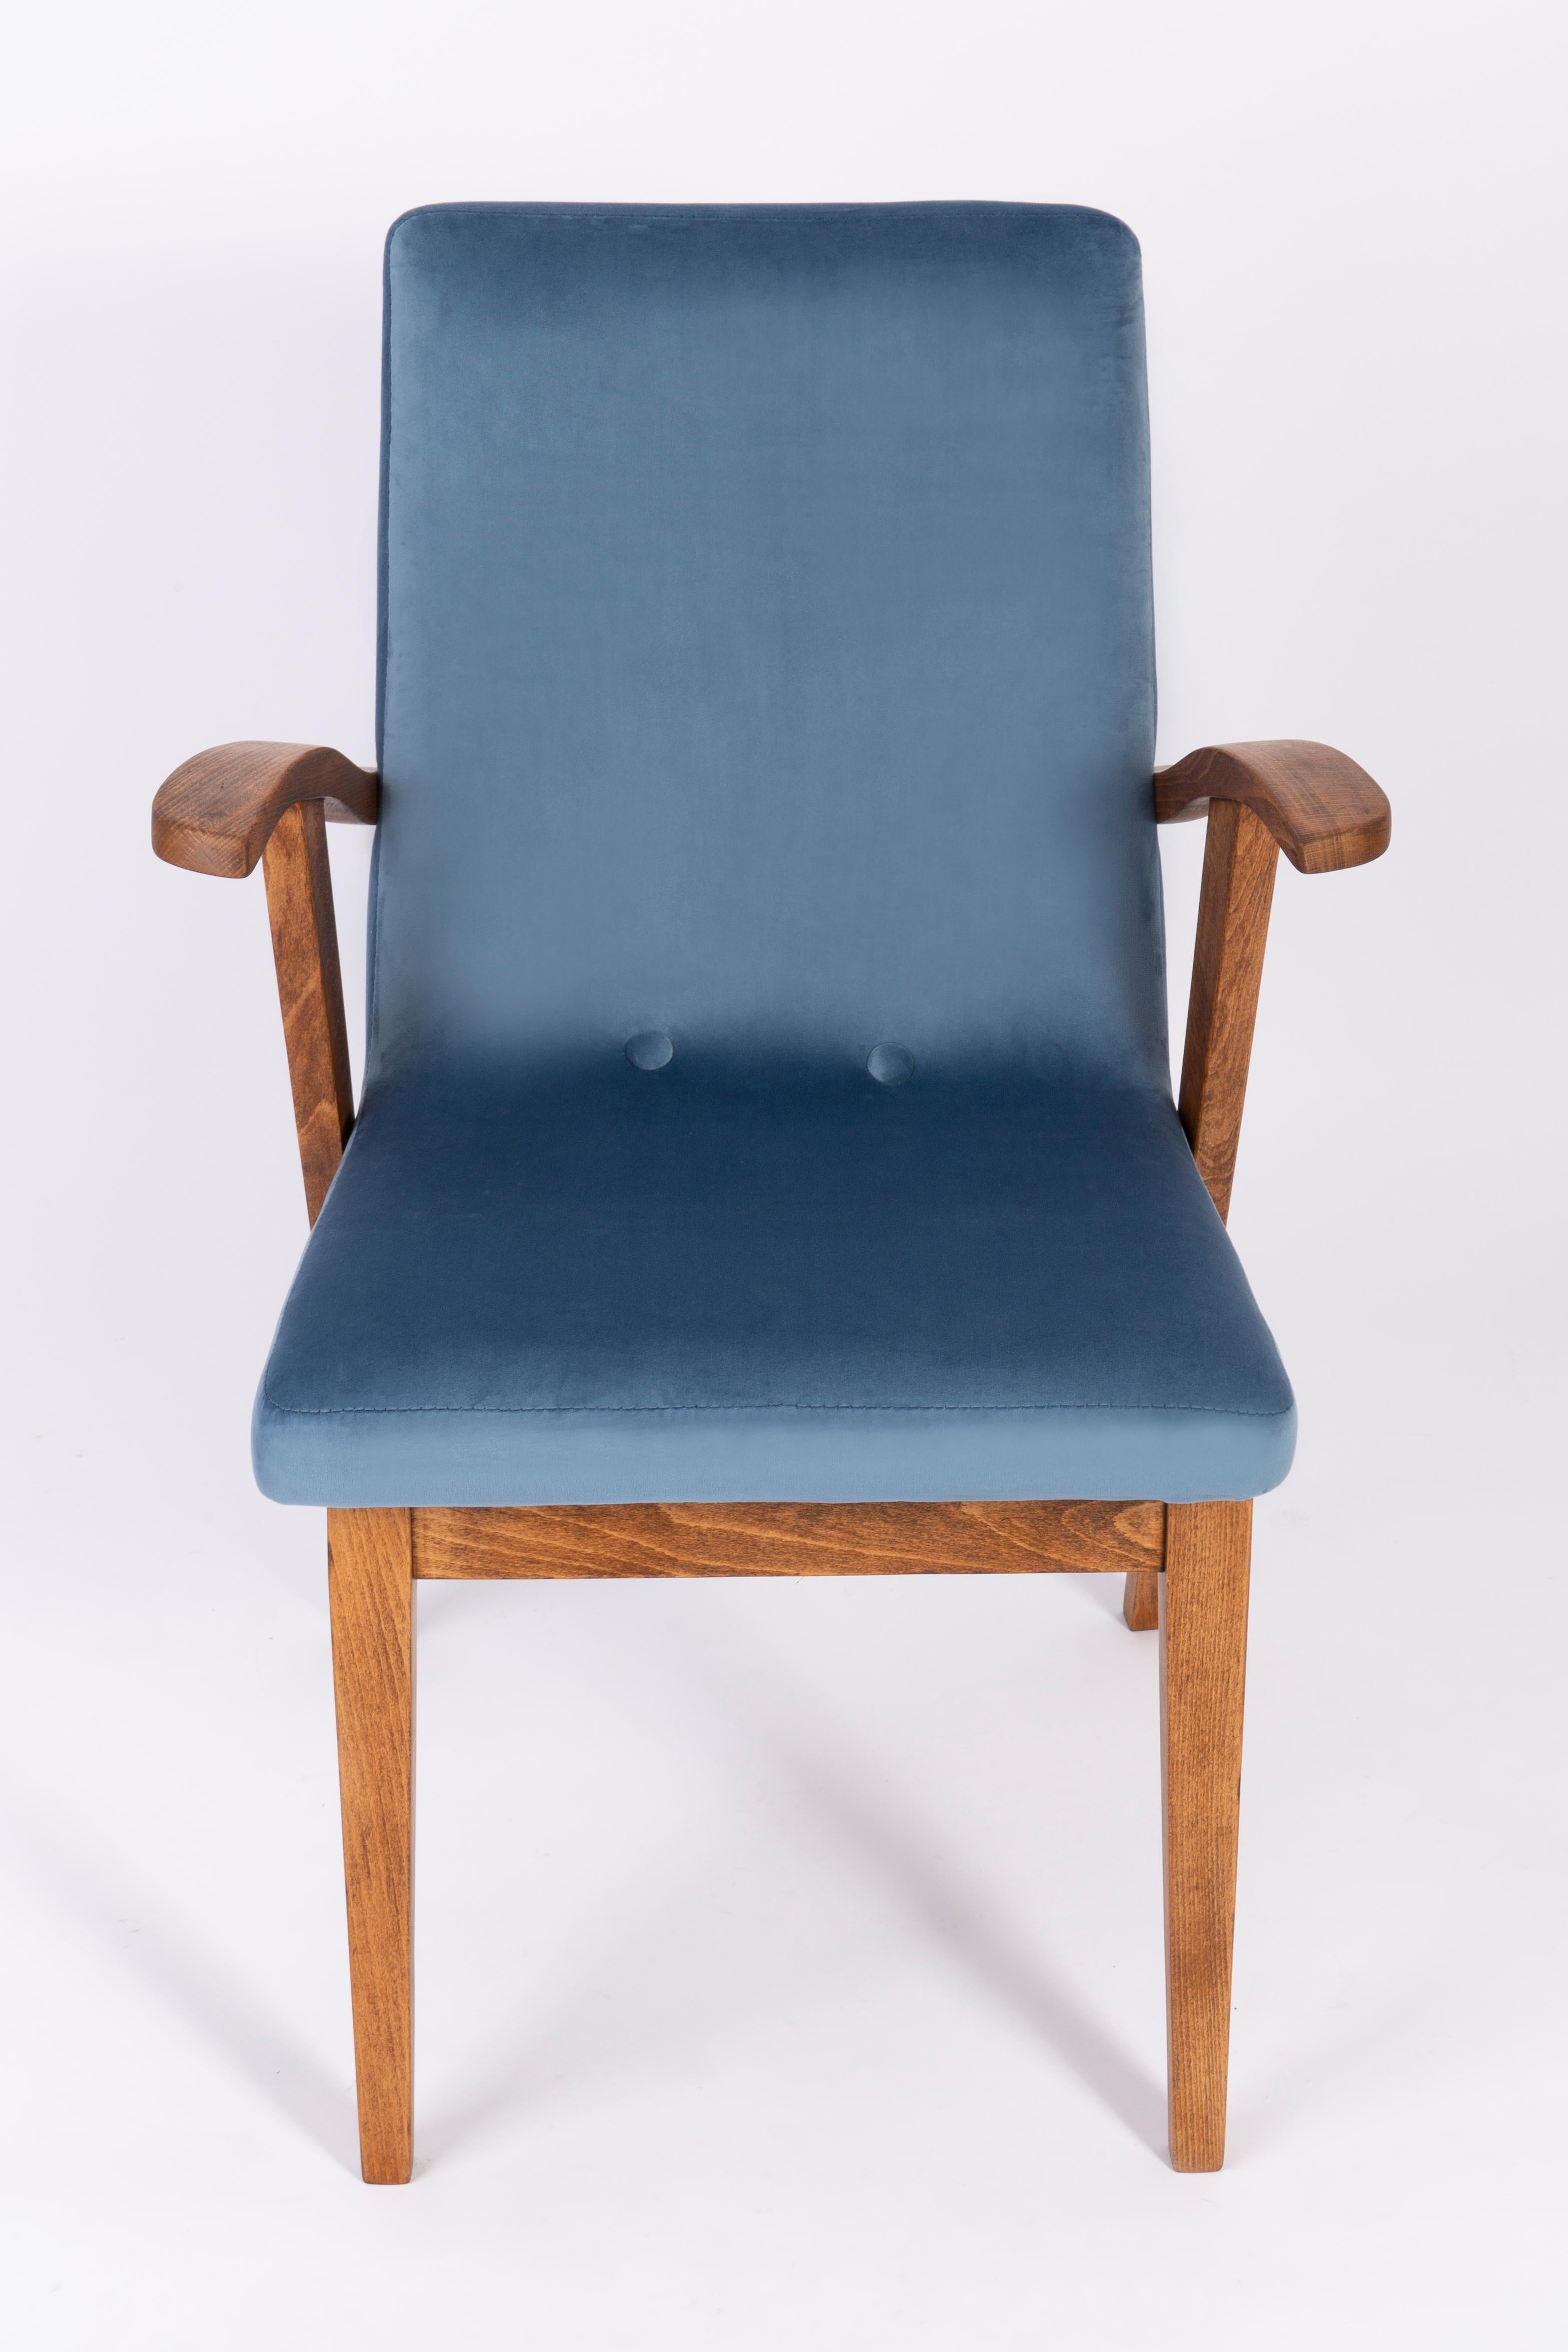 Hand-Crafted Pair of 20th Century Vintage Blue Chairs by Mieczyslaw Puchala, 1960s For Sale